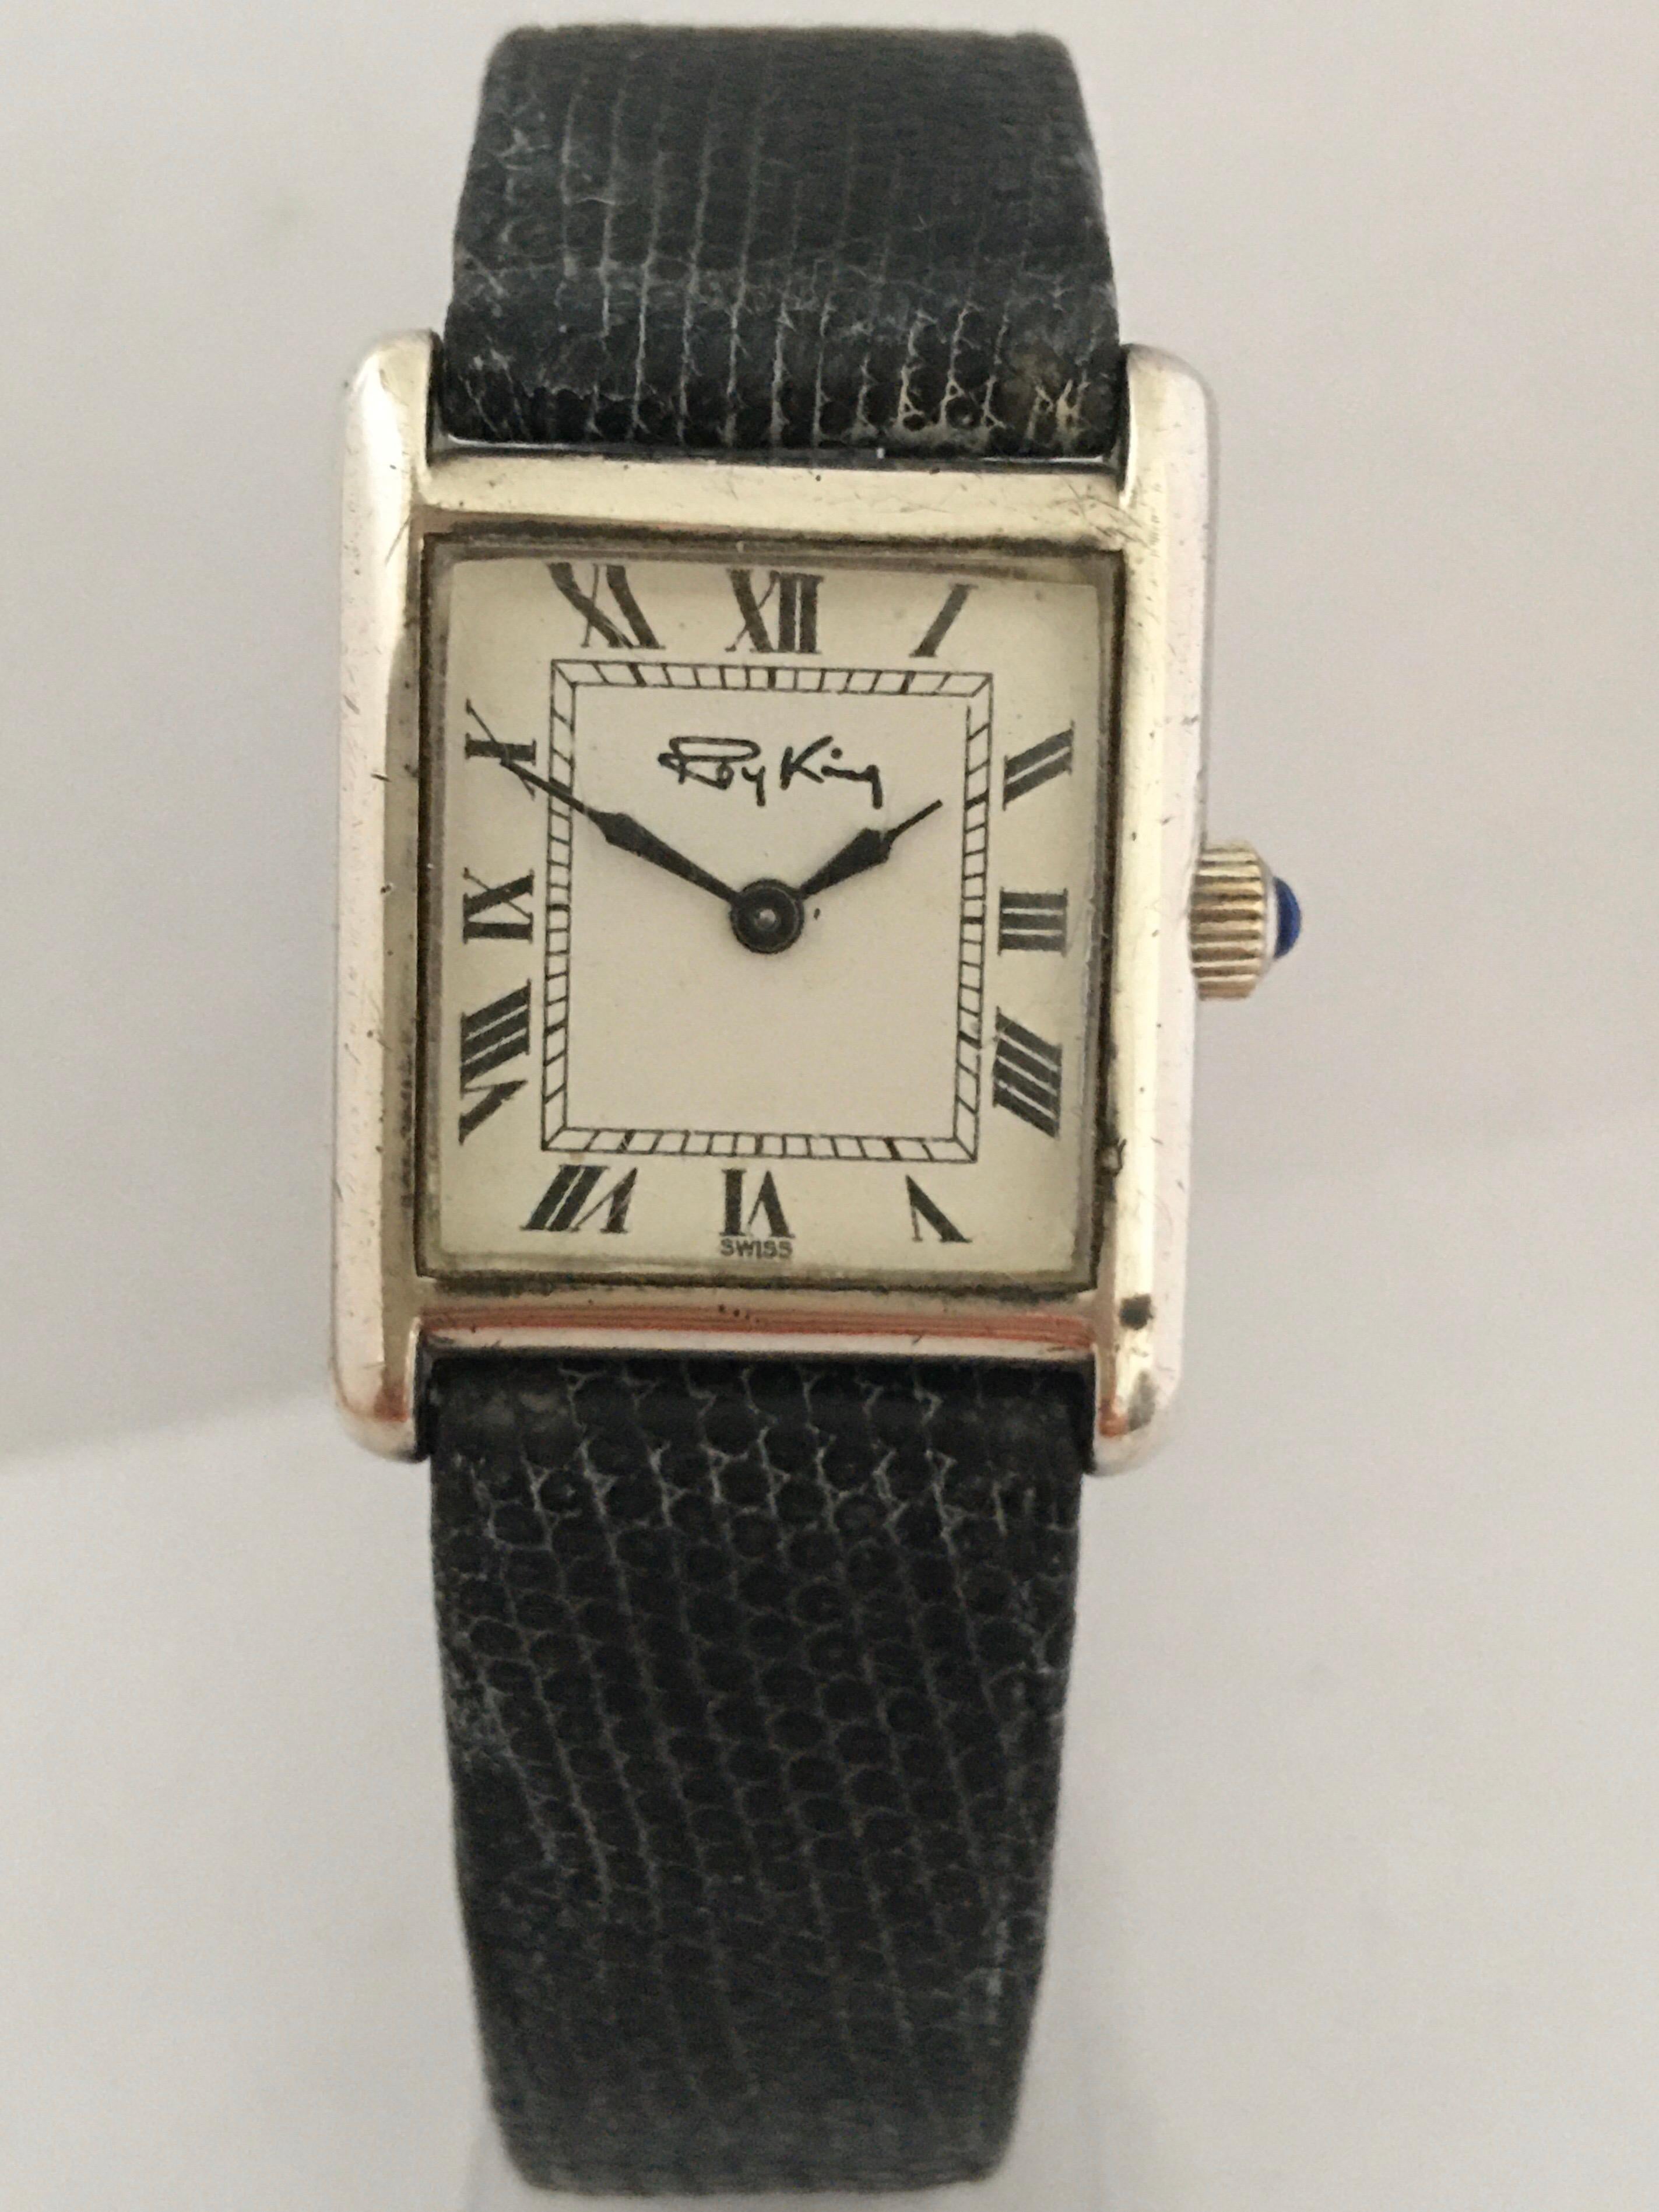 Vintage 1977 Roy King Solid Silver Tank Watch 10